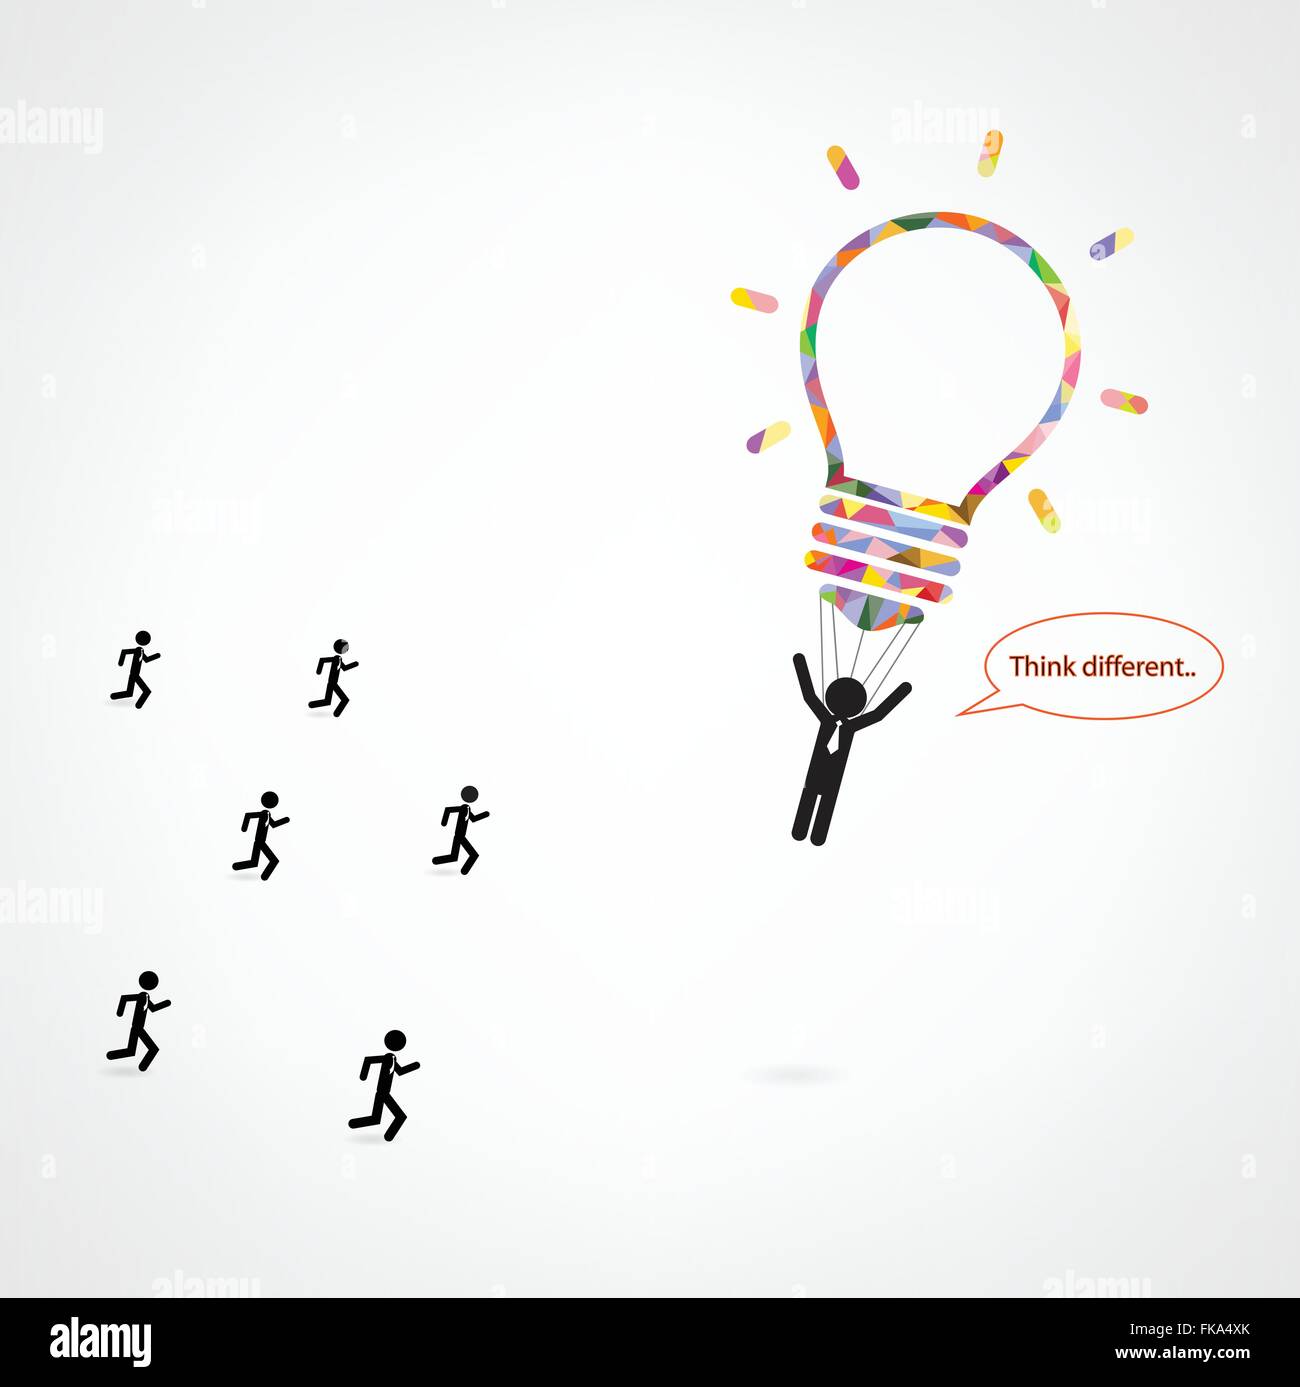 Think different, stand out from crowd.vector illustration Stock Vector